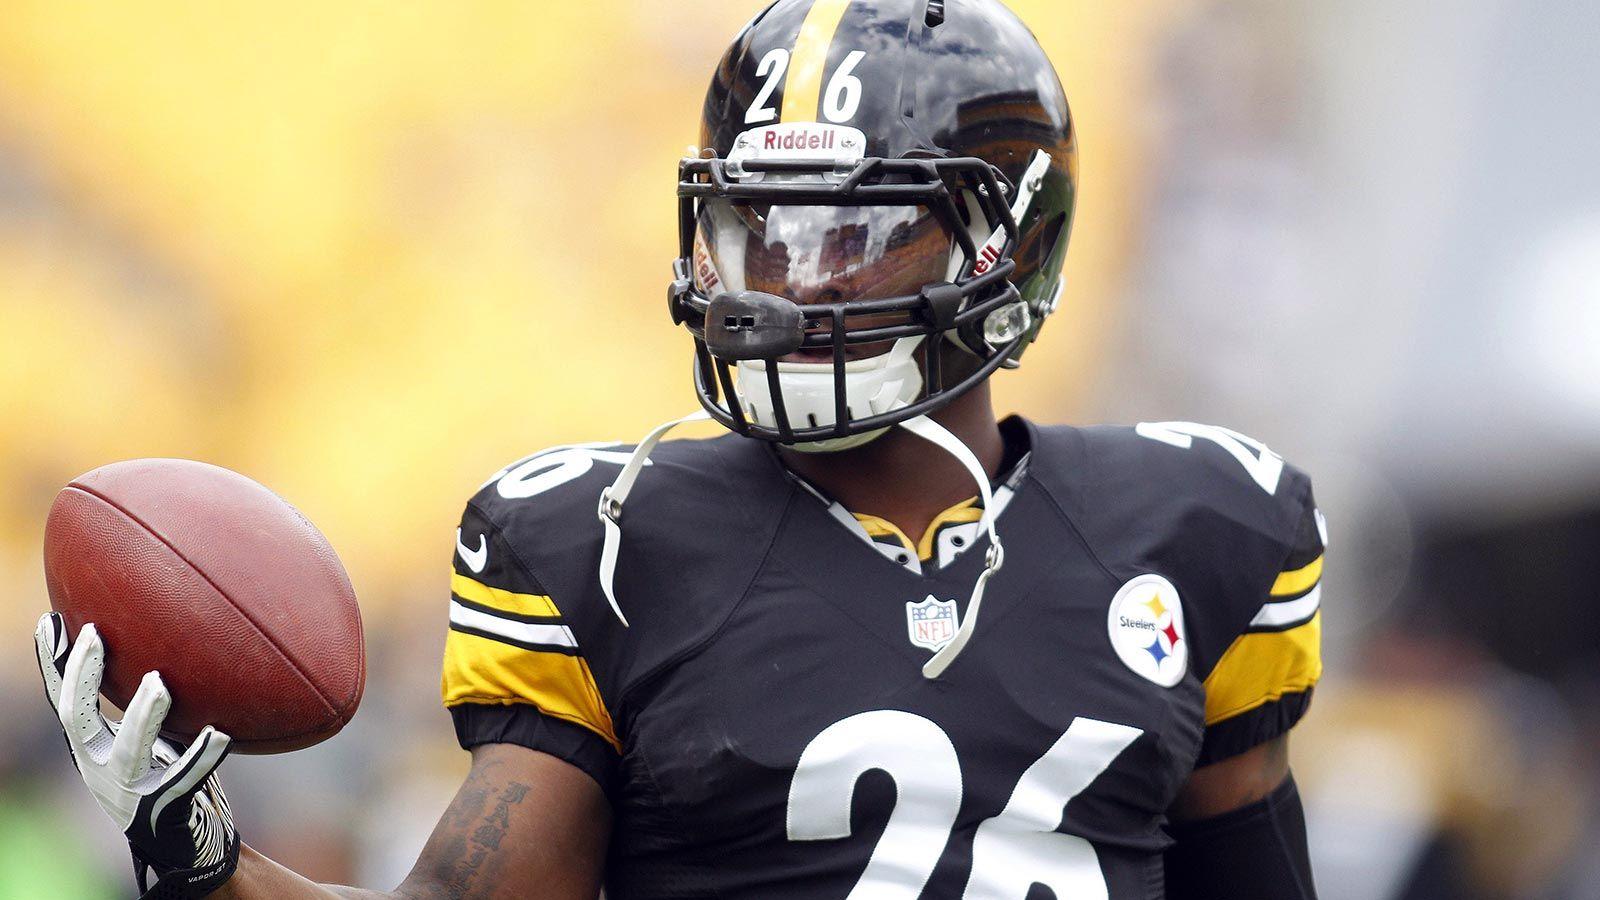 How to bet on Le'Veon Bell and The Steelers this 2015 Season